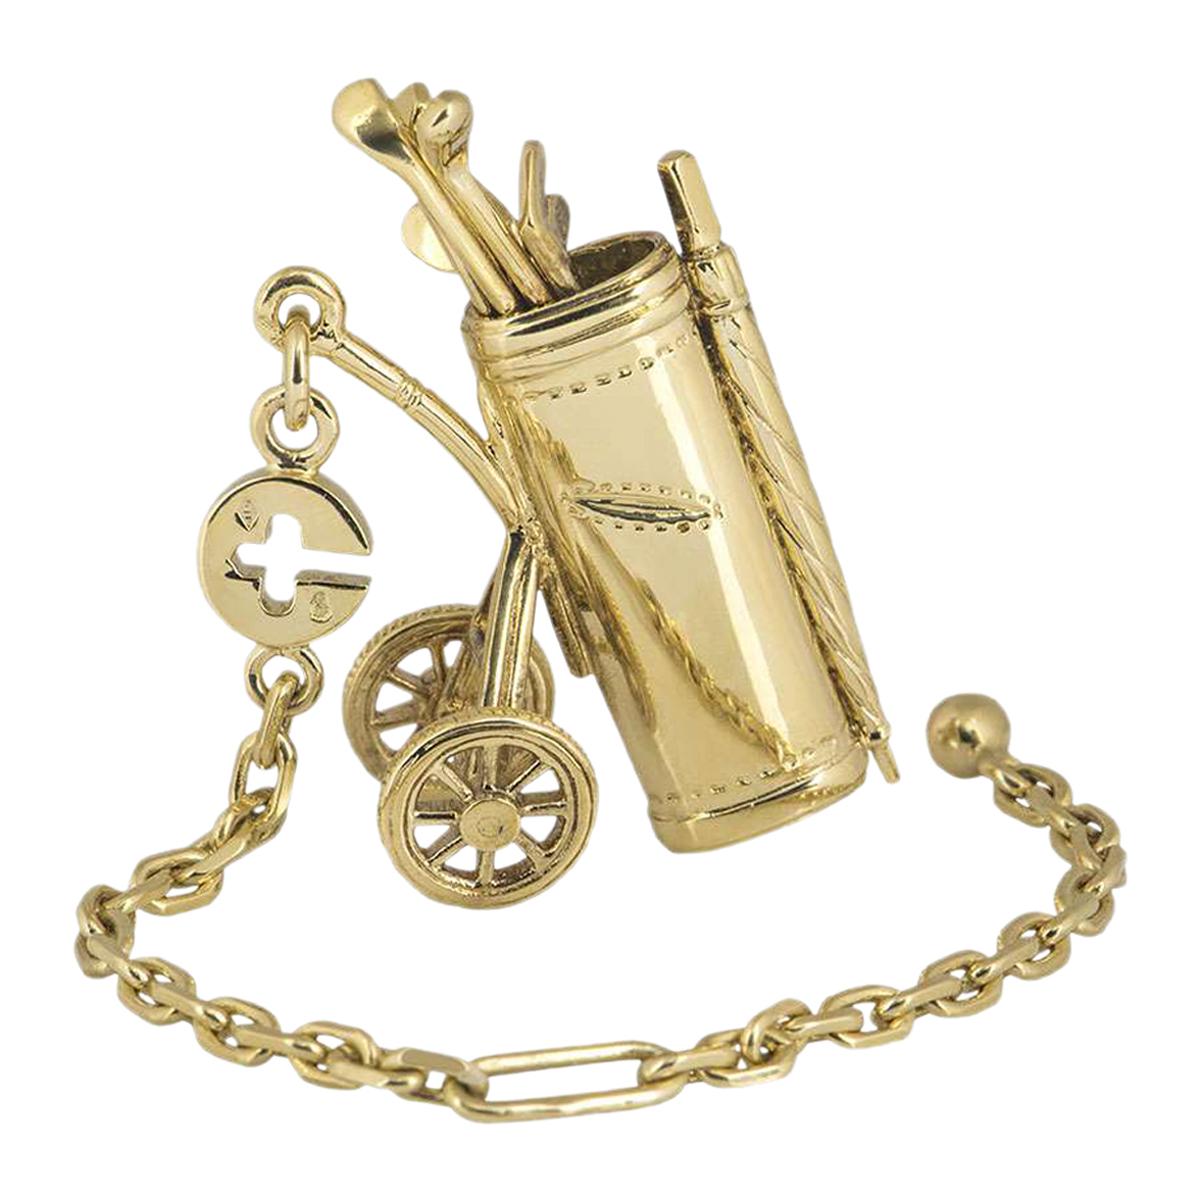 Dunhill Yellow Gold Golf Trolly Key Chain